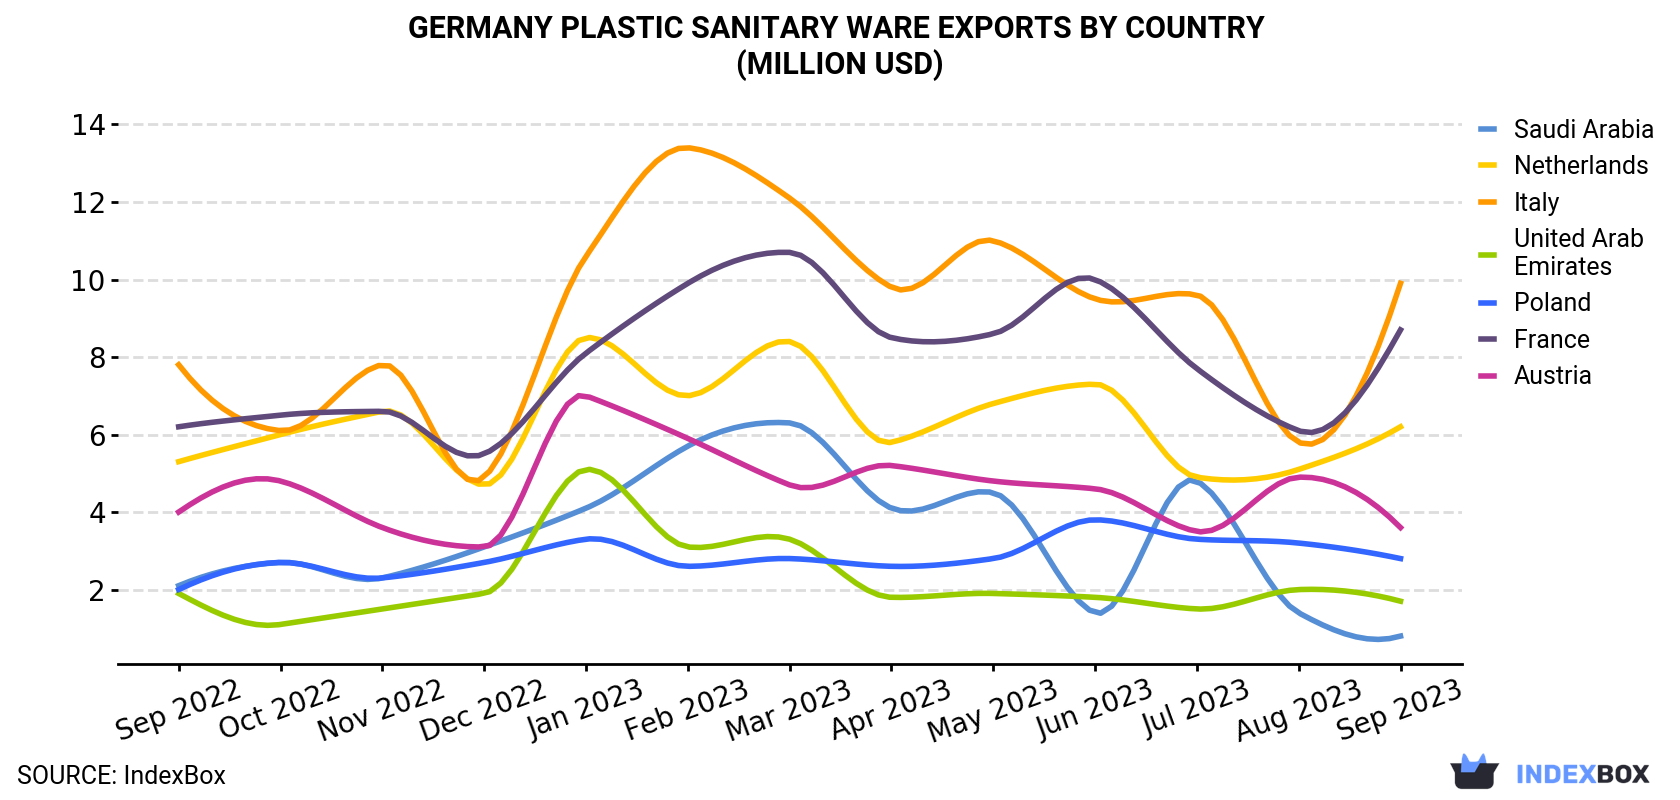 Germany Plastic Sanitary Ware Exports By Country (Million USD)